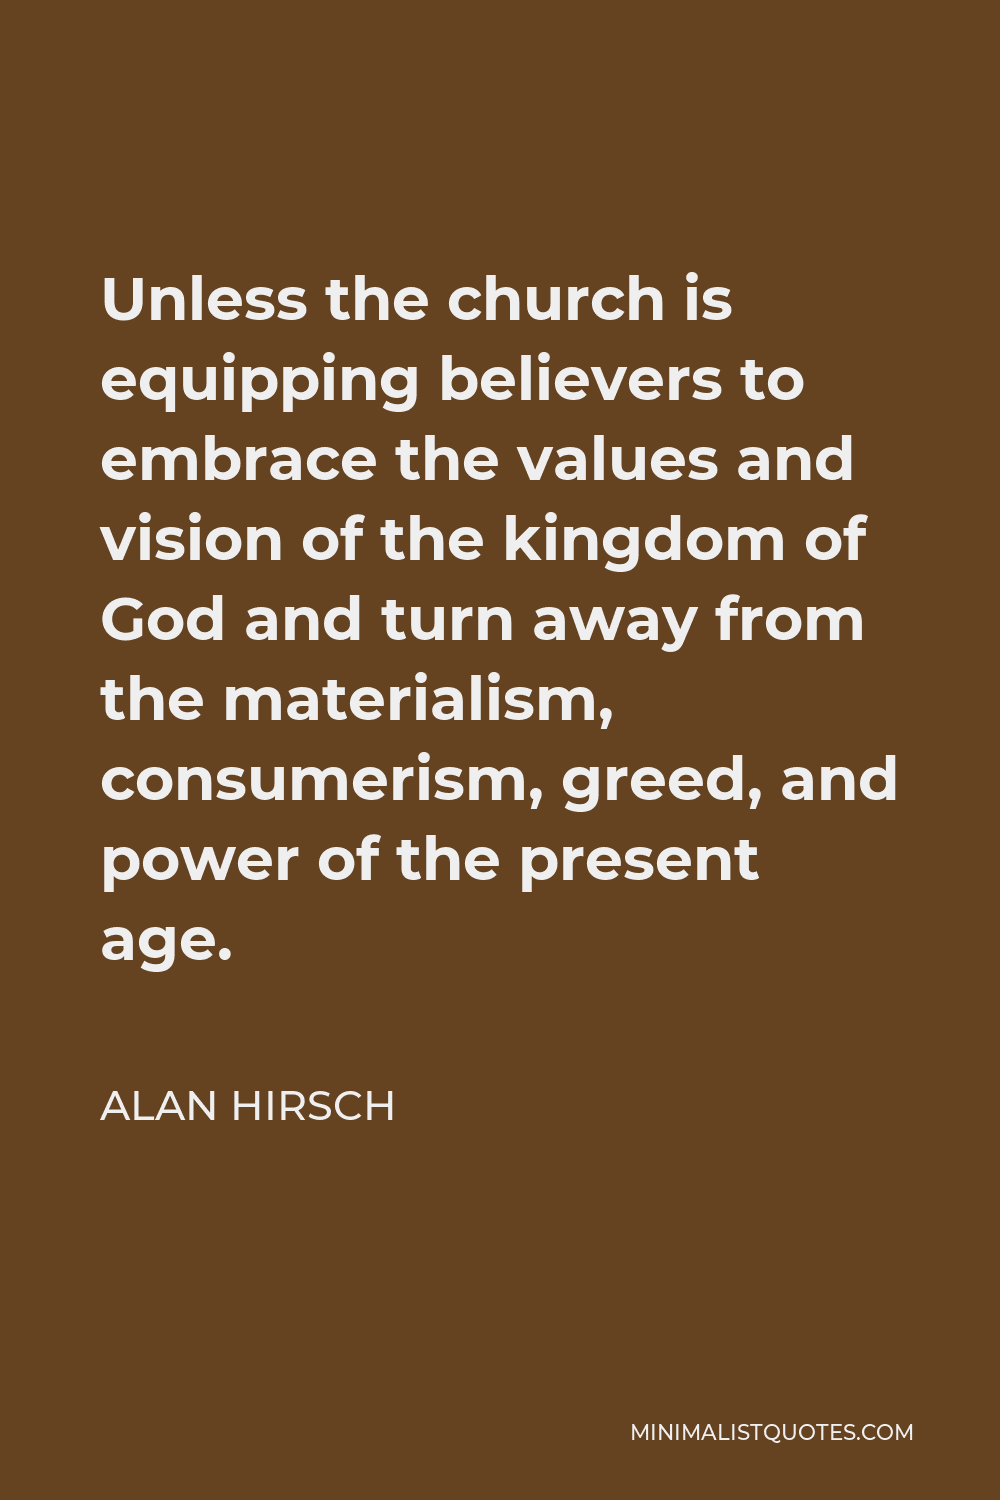 Alan Hirsch Quote - Unless the church is equipping believers to embrace the values and vision of the kingdom of God and turn away from the materialism, consumerism, greed, and power of the present age.